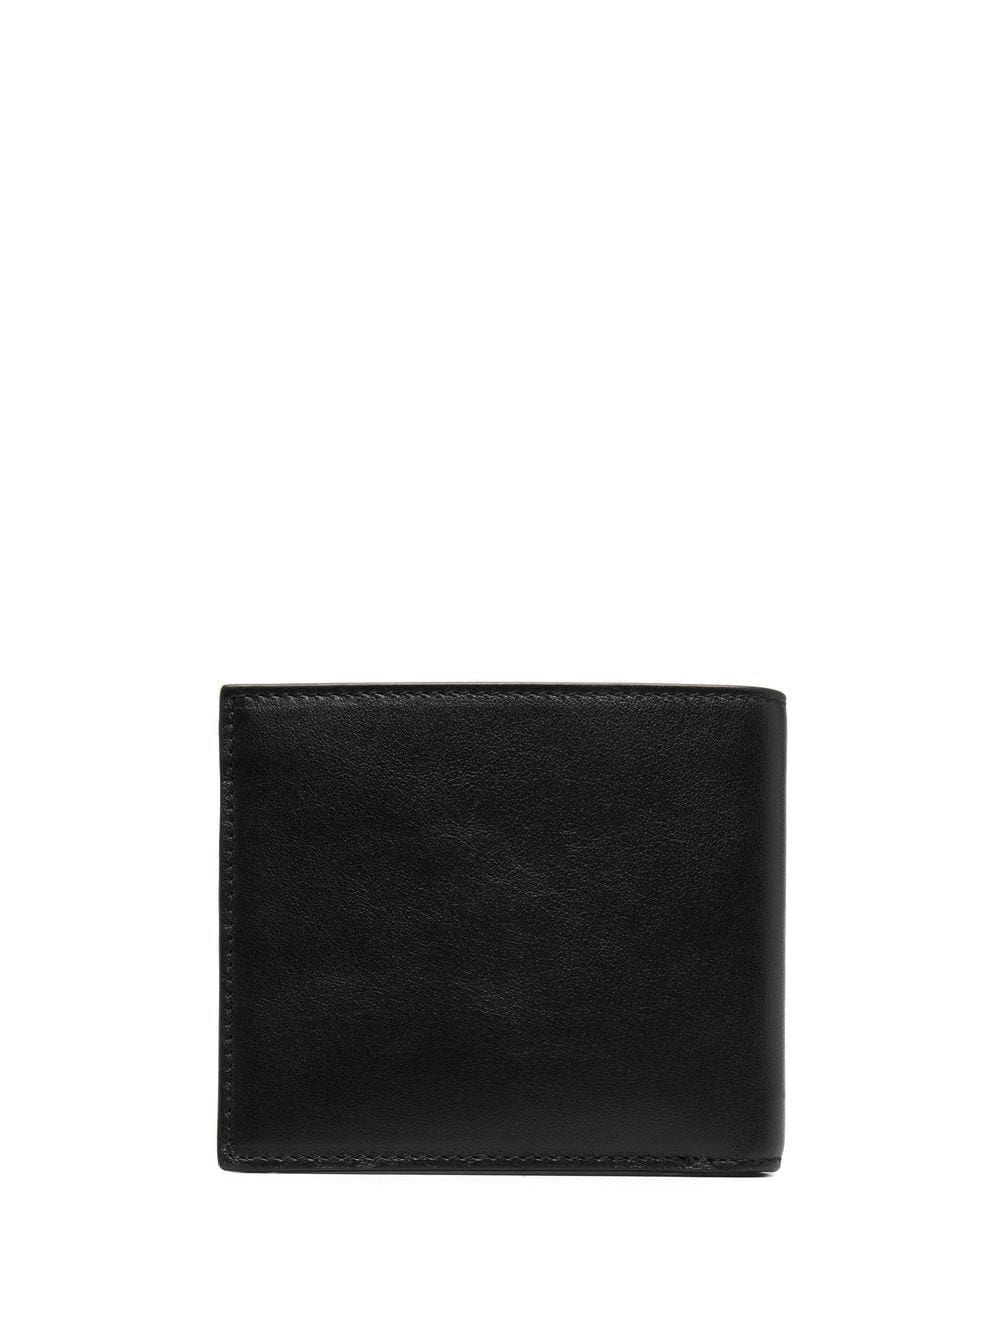 French leather wallet - 2